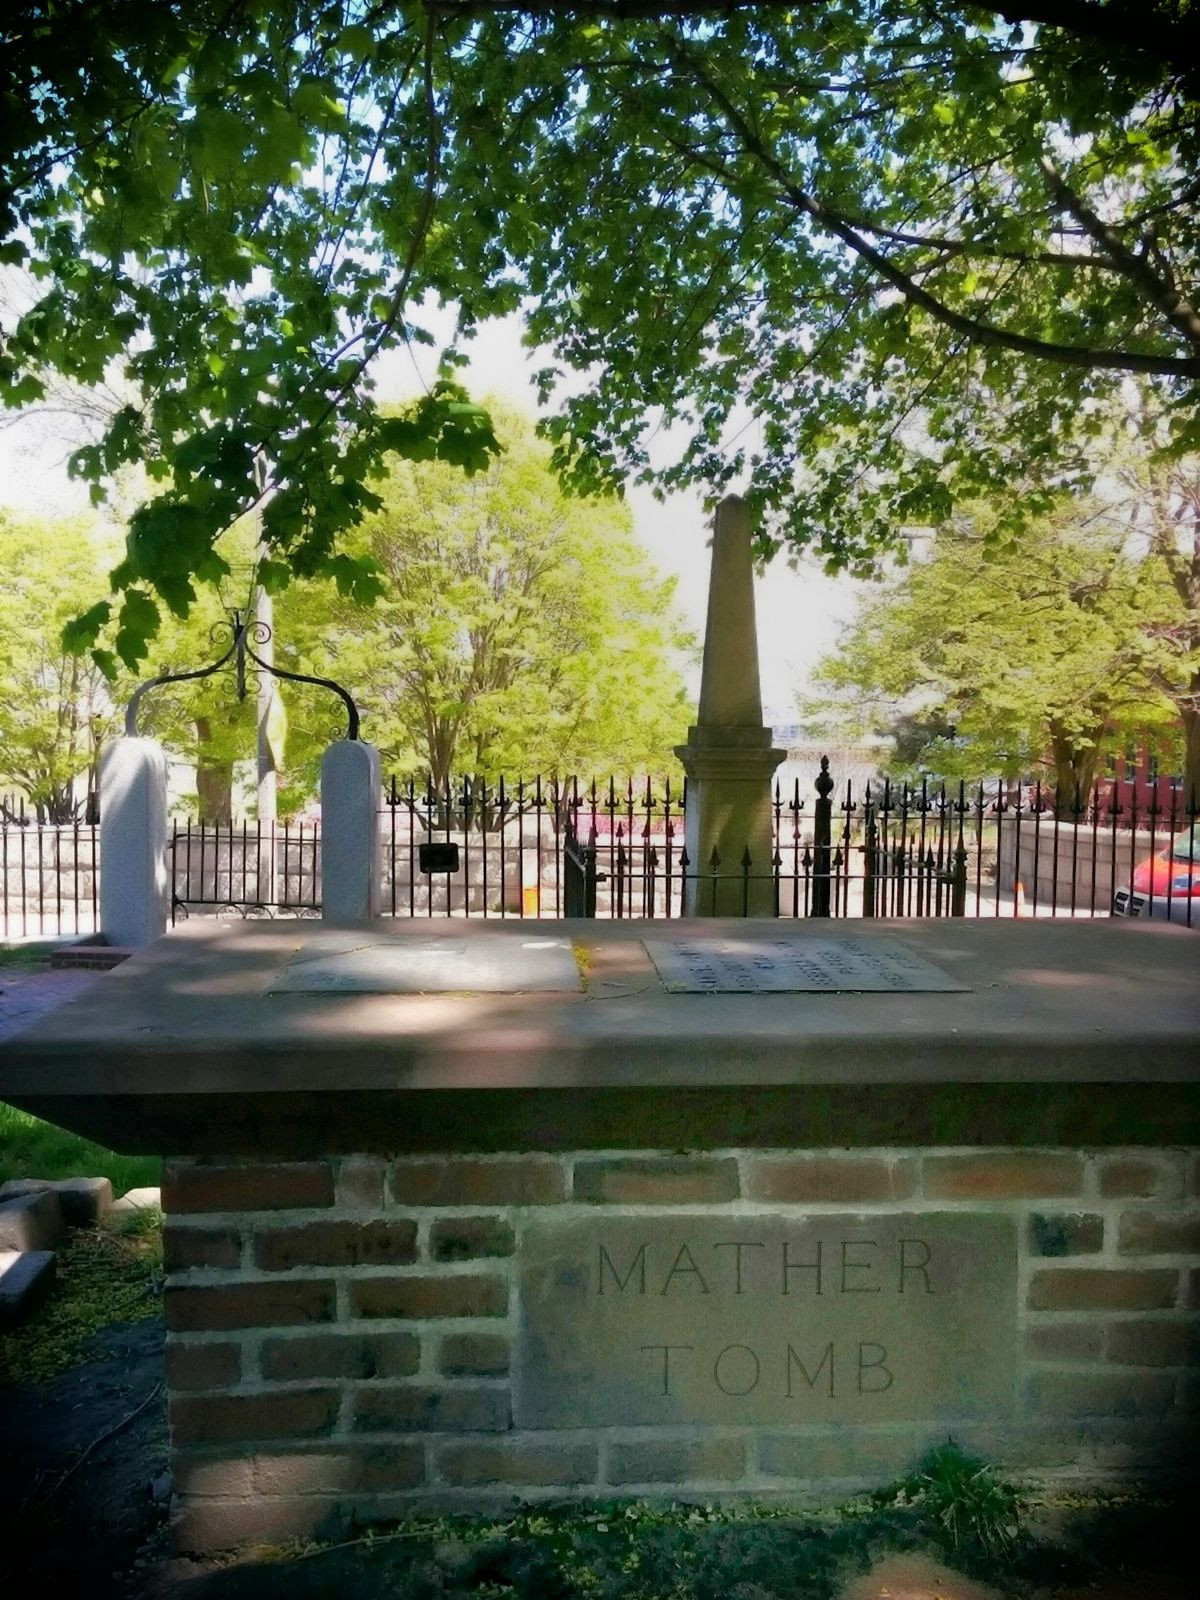 Mather Tomb at Copp's Hill Burying Ground